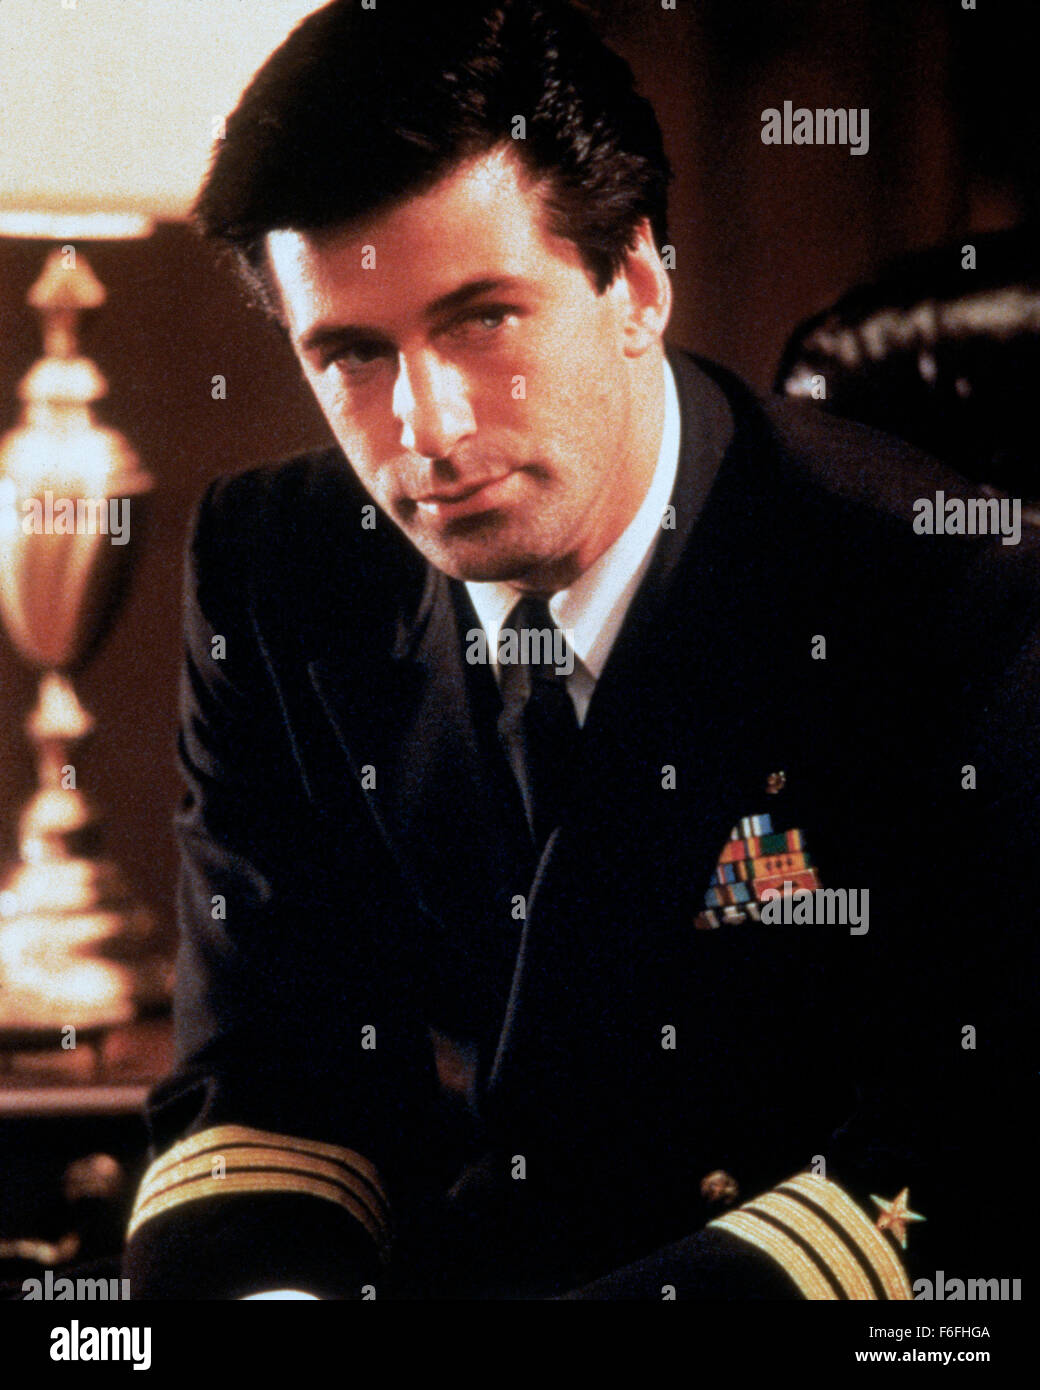 RELEASE DATE: March 2, 1990   MOVIE TITLE: The Hunt For Red October   STUDIO: Paramount Pictures   DIRECTOR: John McTiernan   PLOT: In 1984, the USSR's best submarine captain in their newest sub violates orders and heads for the USA. Is he trying to defect, or to start a war?   PICTURED: ALEC BALDWIN as Jack Ryan.   (Credit Image: c Paramount Pictures/Entertainment Pictures) Stock Photo